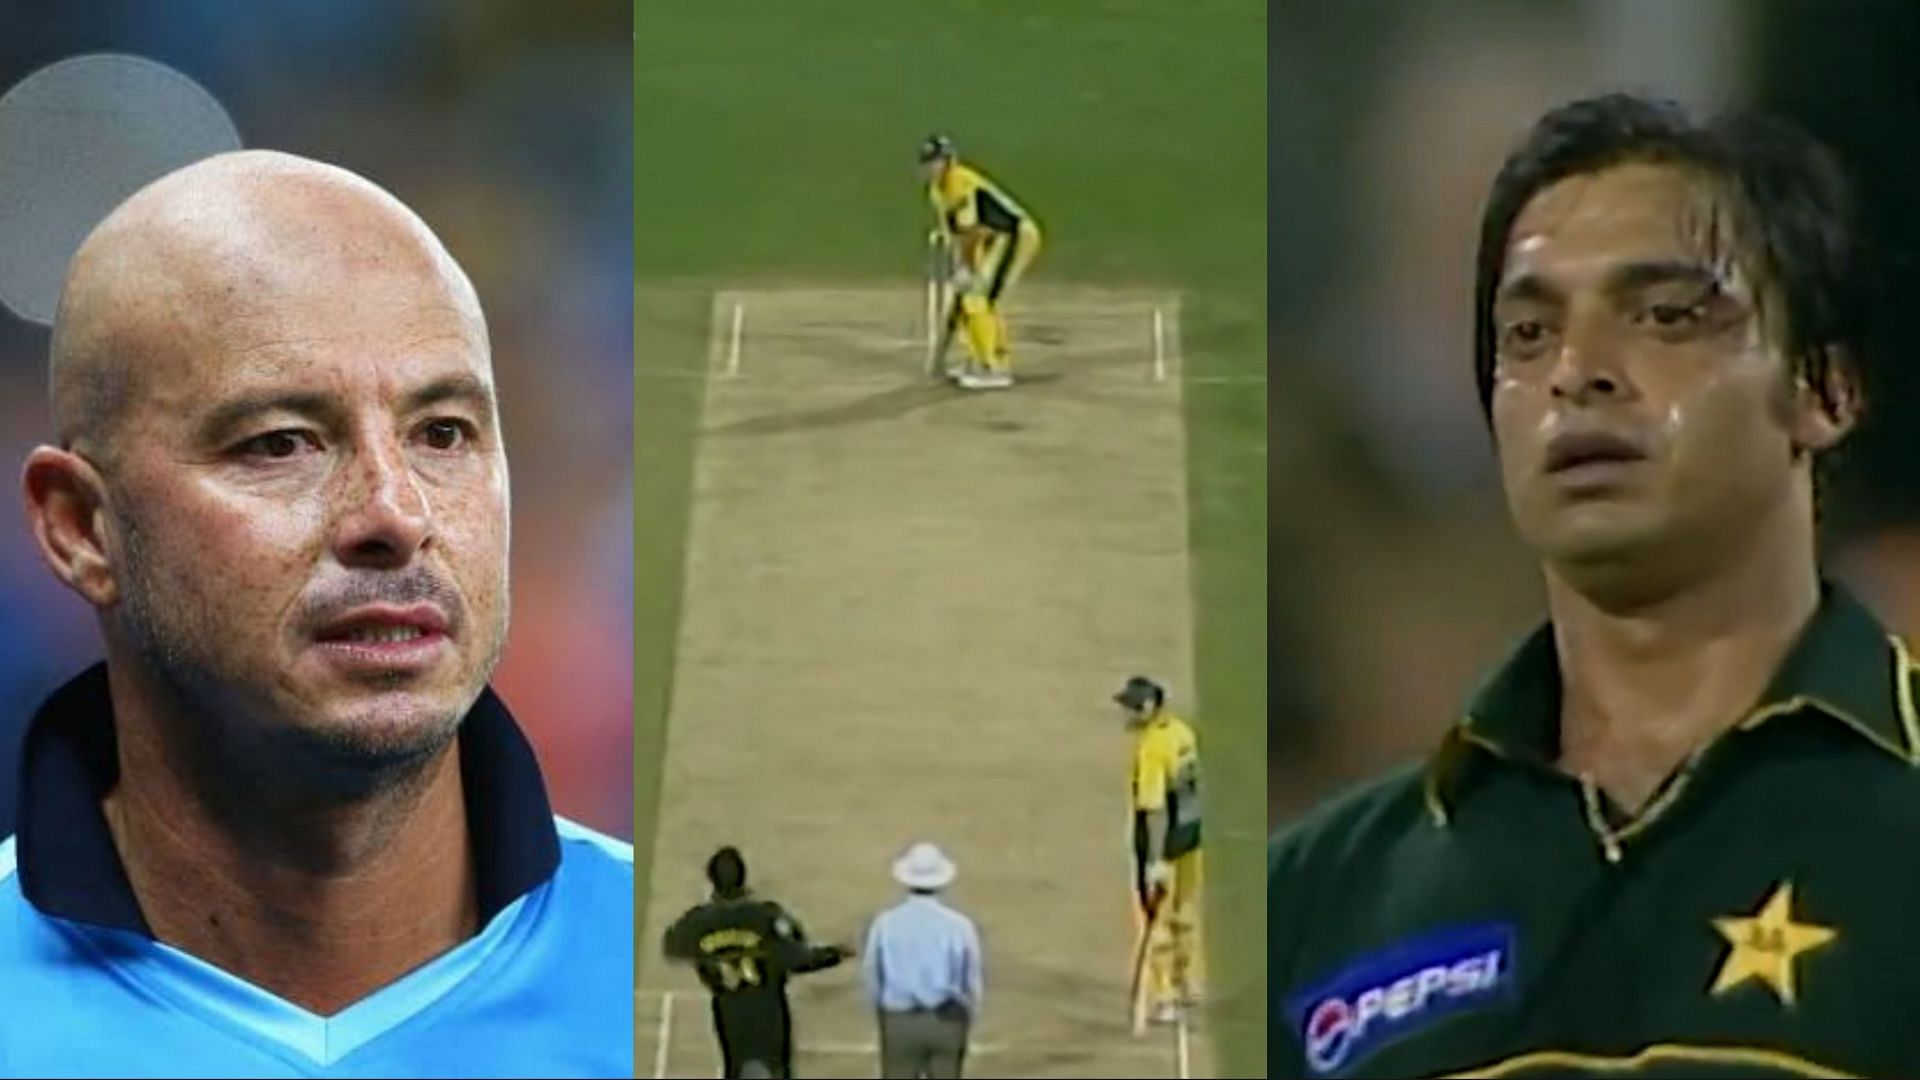 Herschelle Gibbs has reacted to the quick delivery bowled by Shoaib Akhtar